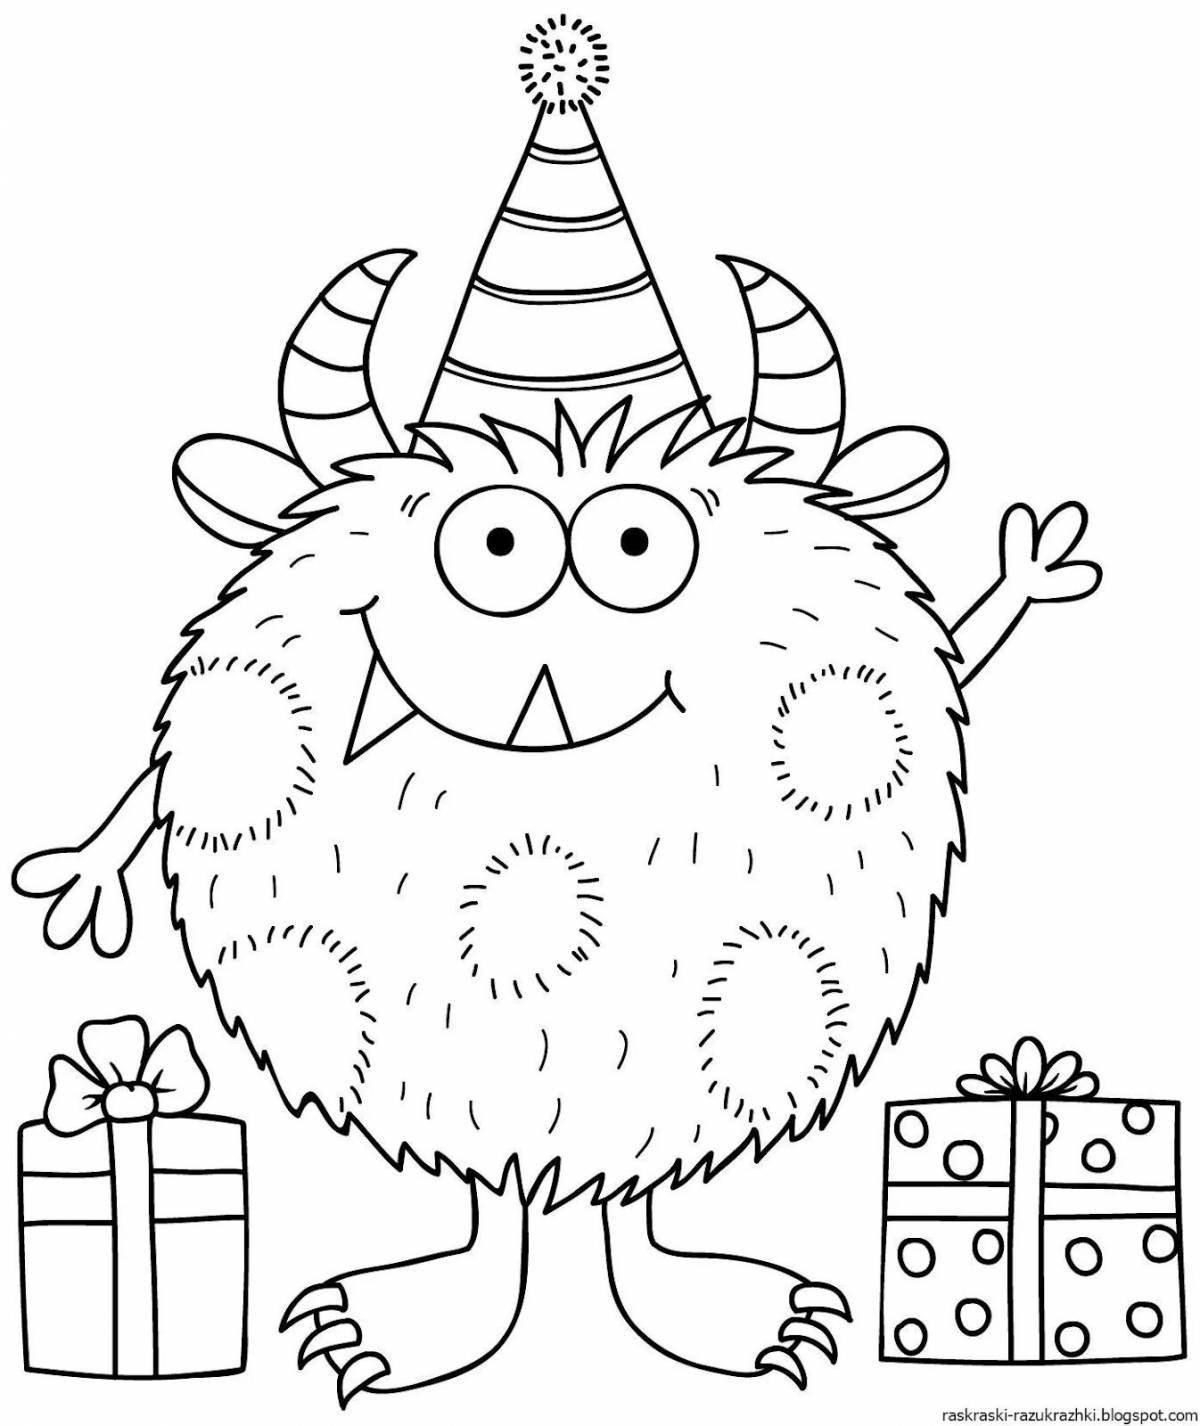 Funny monsters coloring book